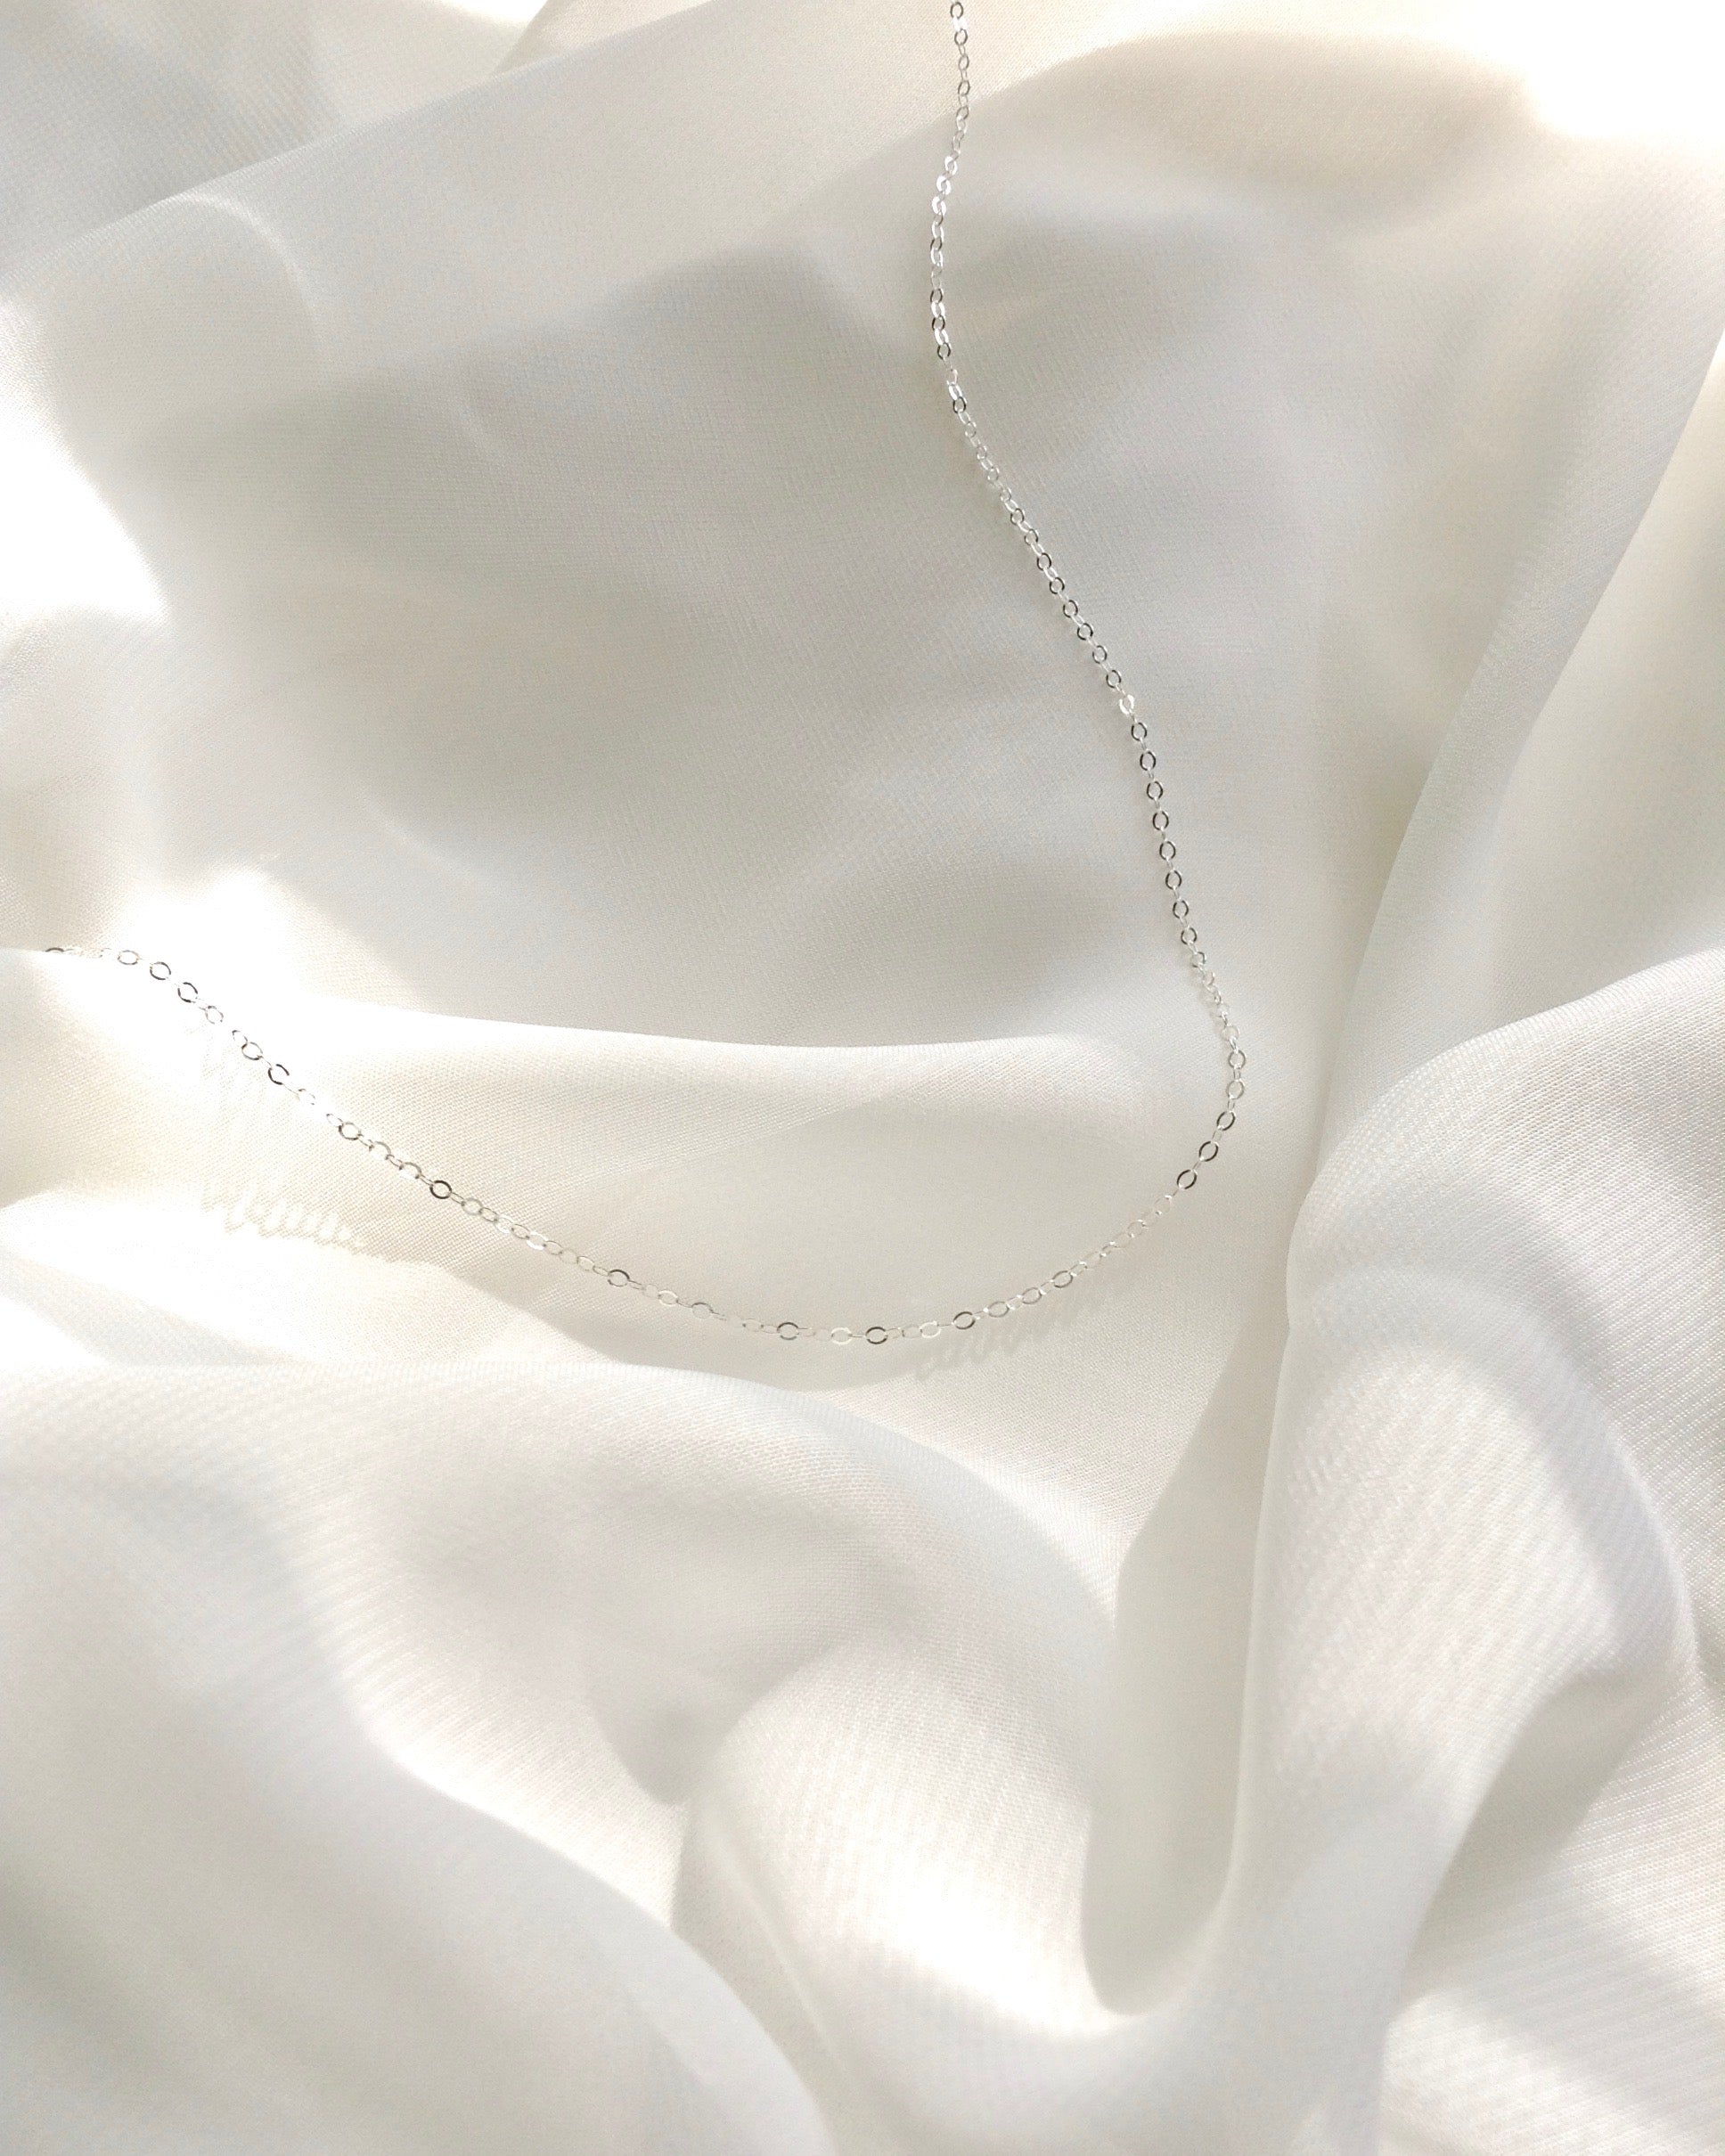 Dainty Thin Everyday Necklace | Plain Thin Chain Necklace | IB Jewelry